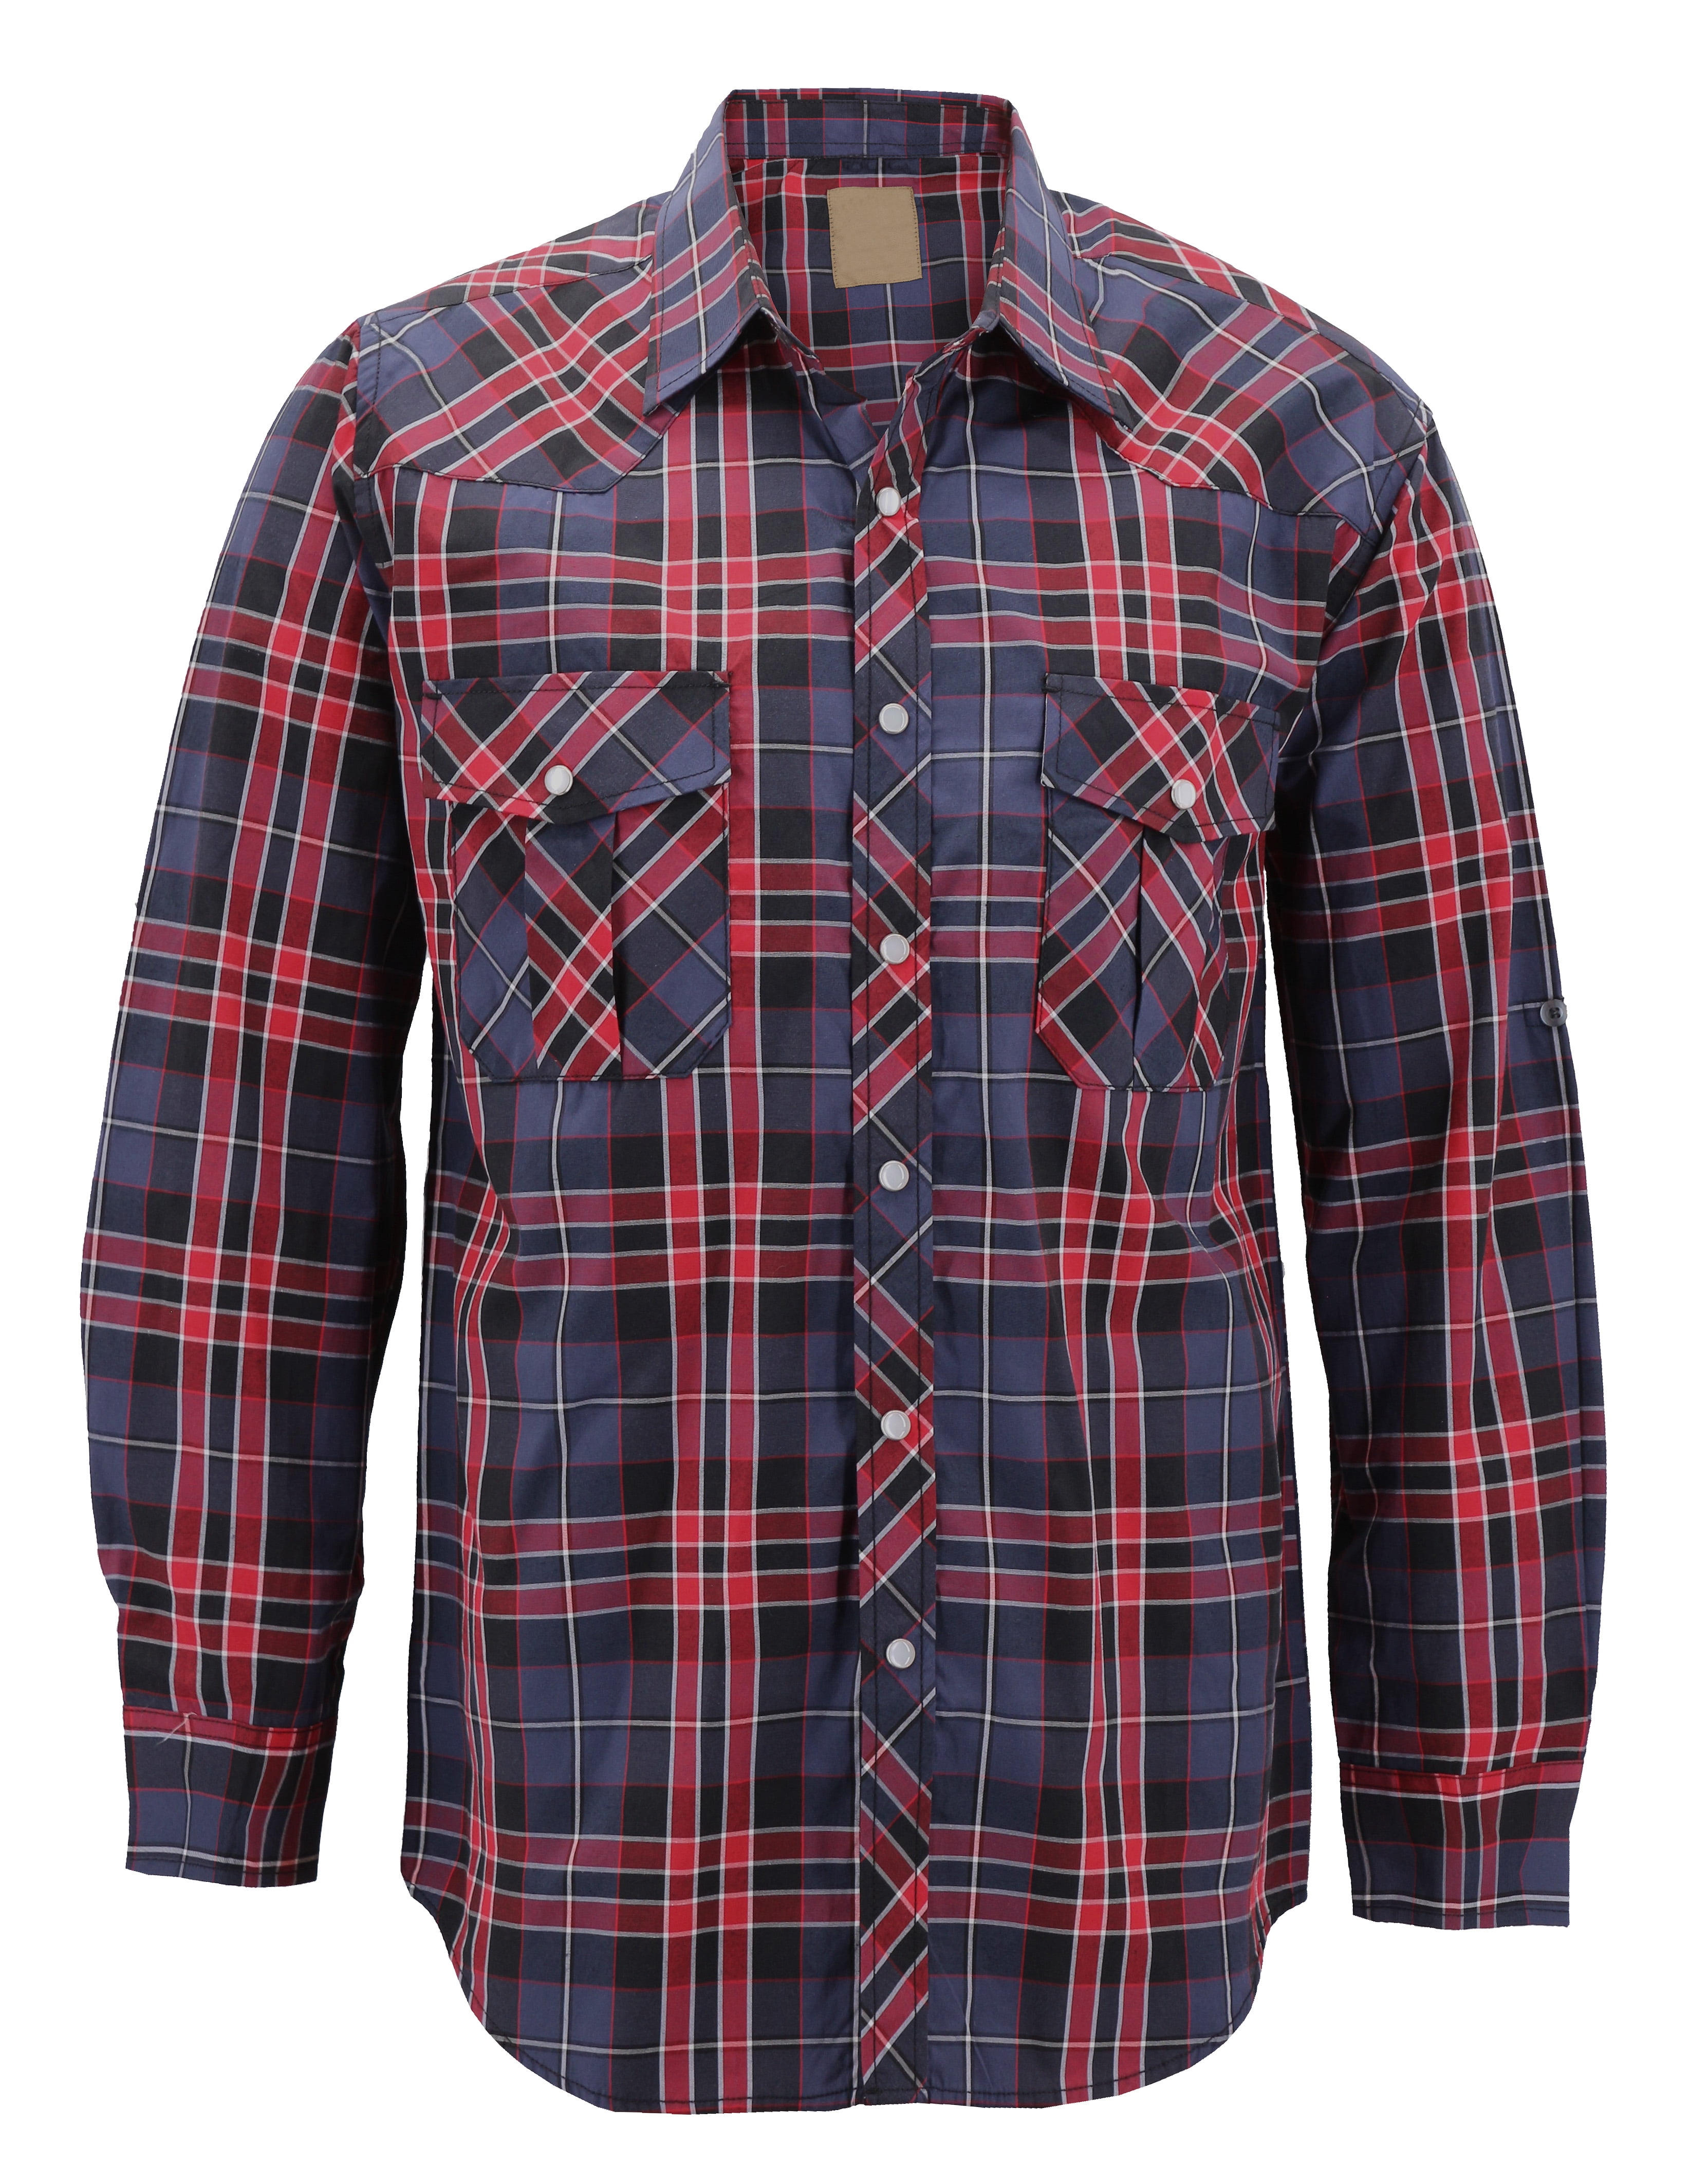 VKWEAR - Men’s Western Pearl Snap Button Down Casual Long Sleeve Plaid ...